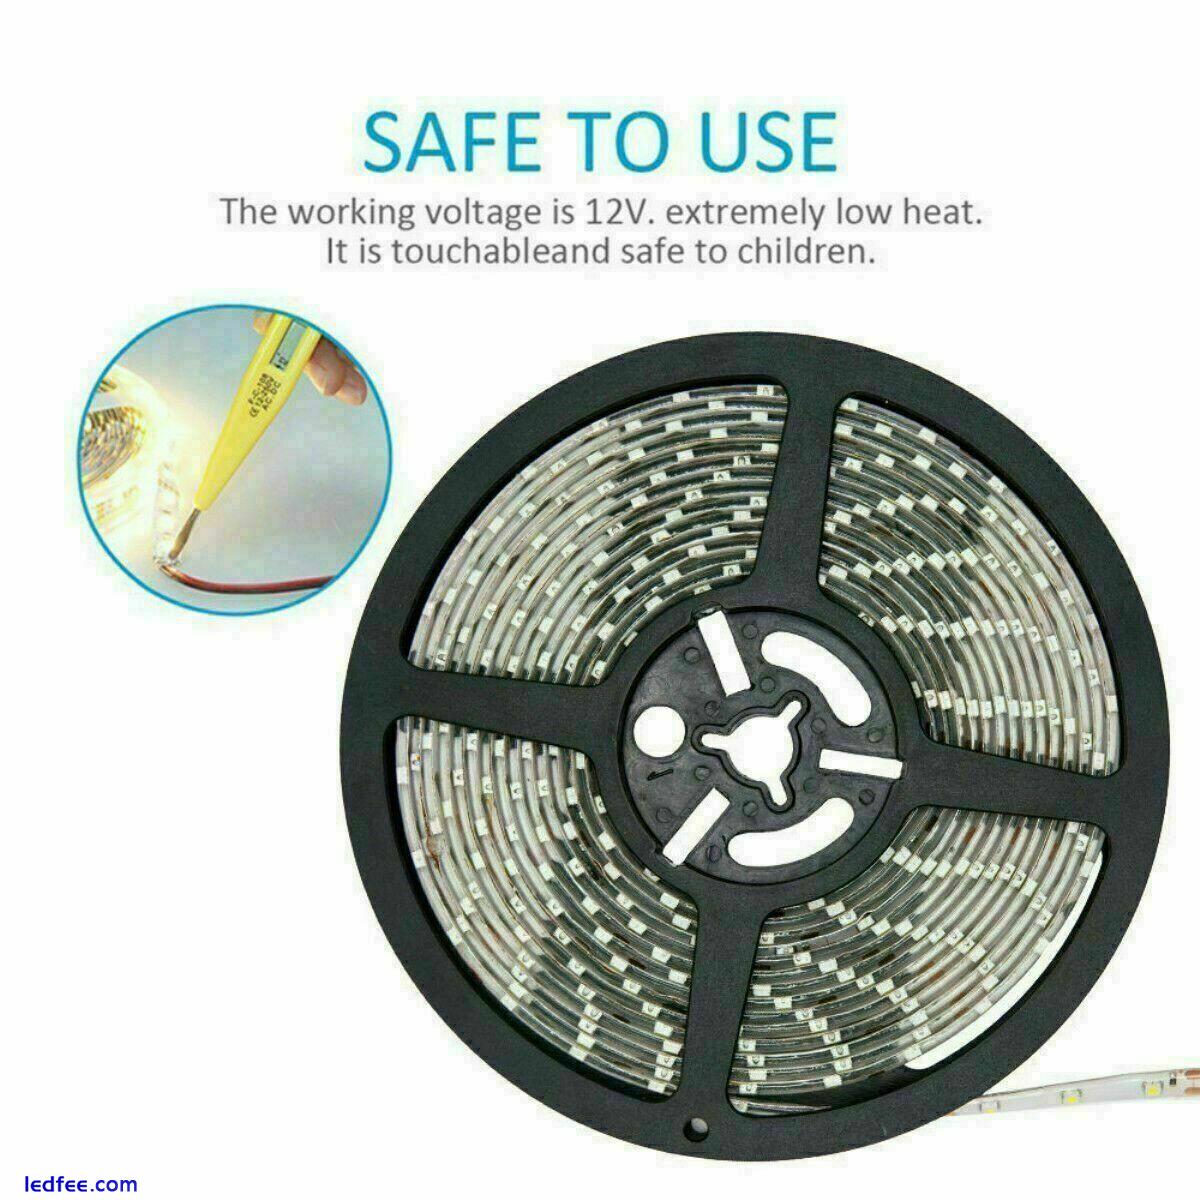 12V 5M LED 3528 SMD FLEXIBLE WIRE STRIP LIGHT ROPE WARM COOL WHITE WATERPROOF UK 4 